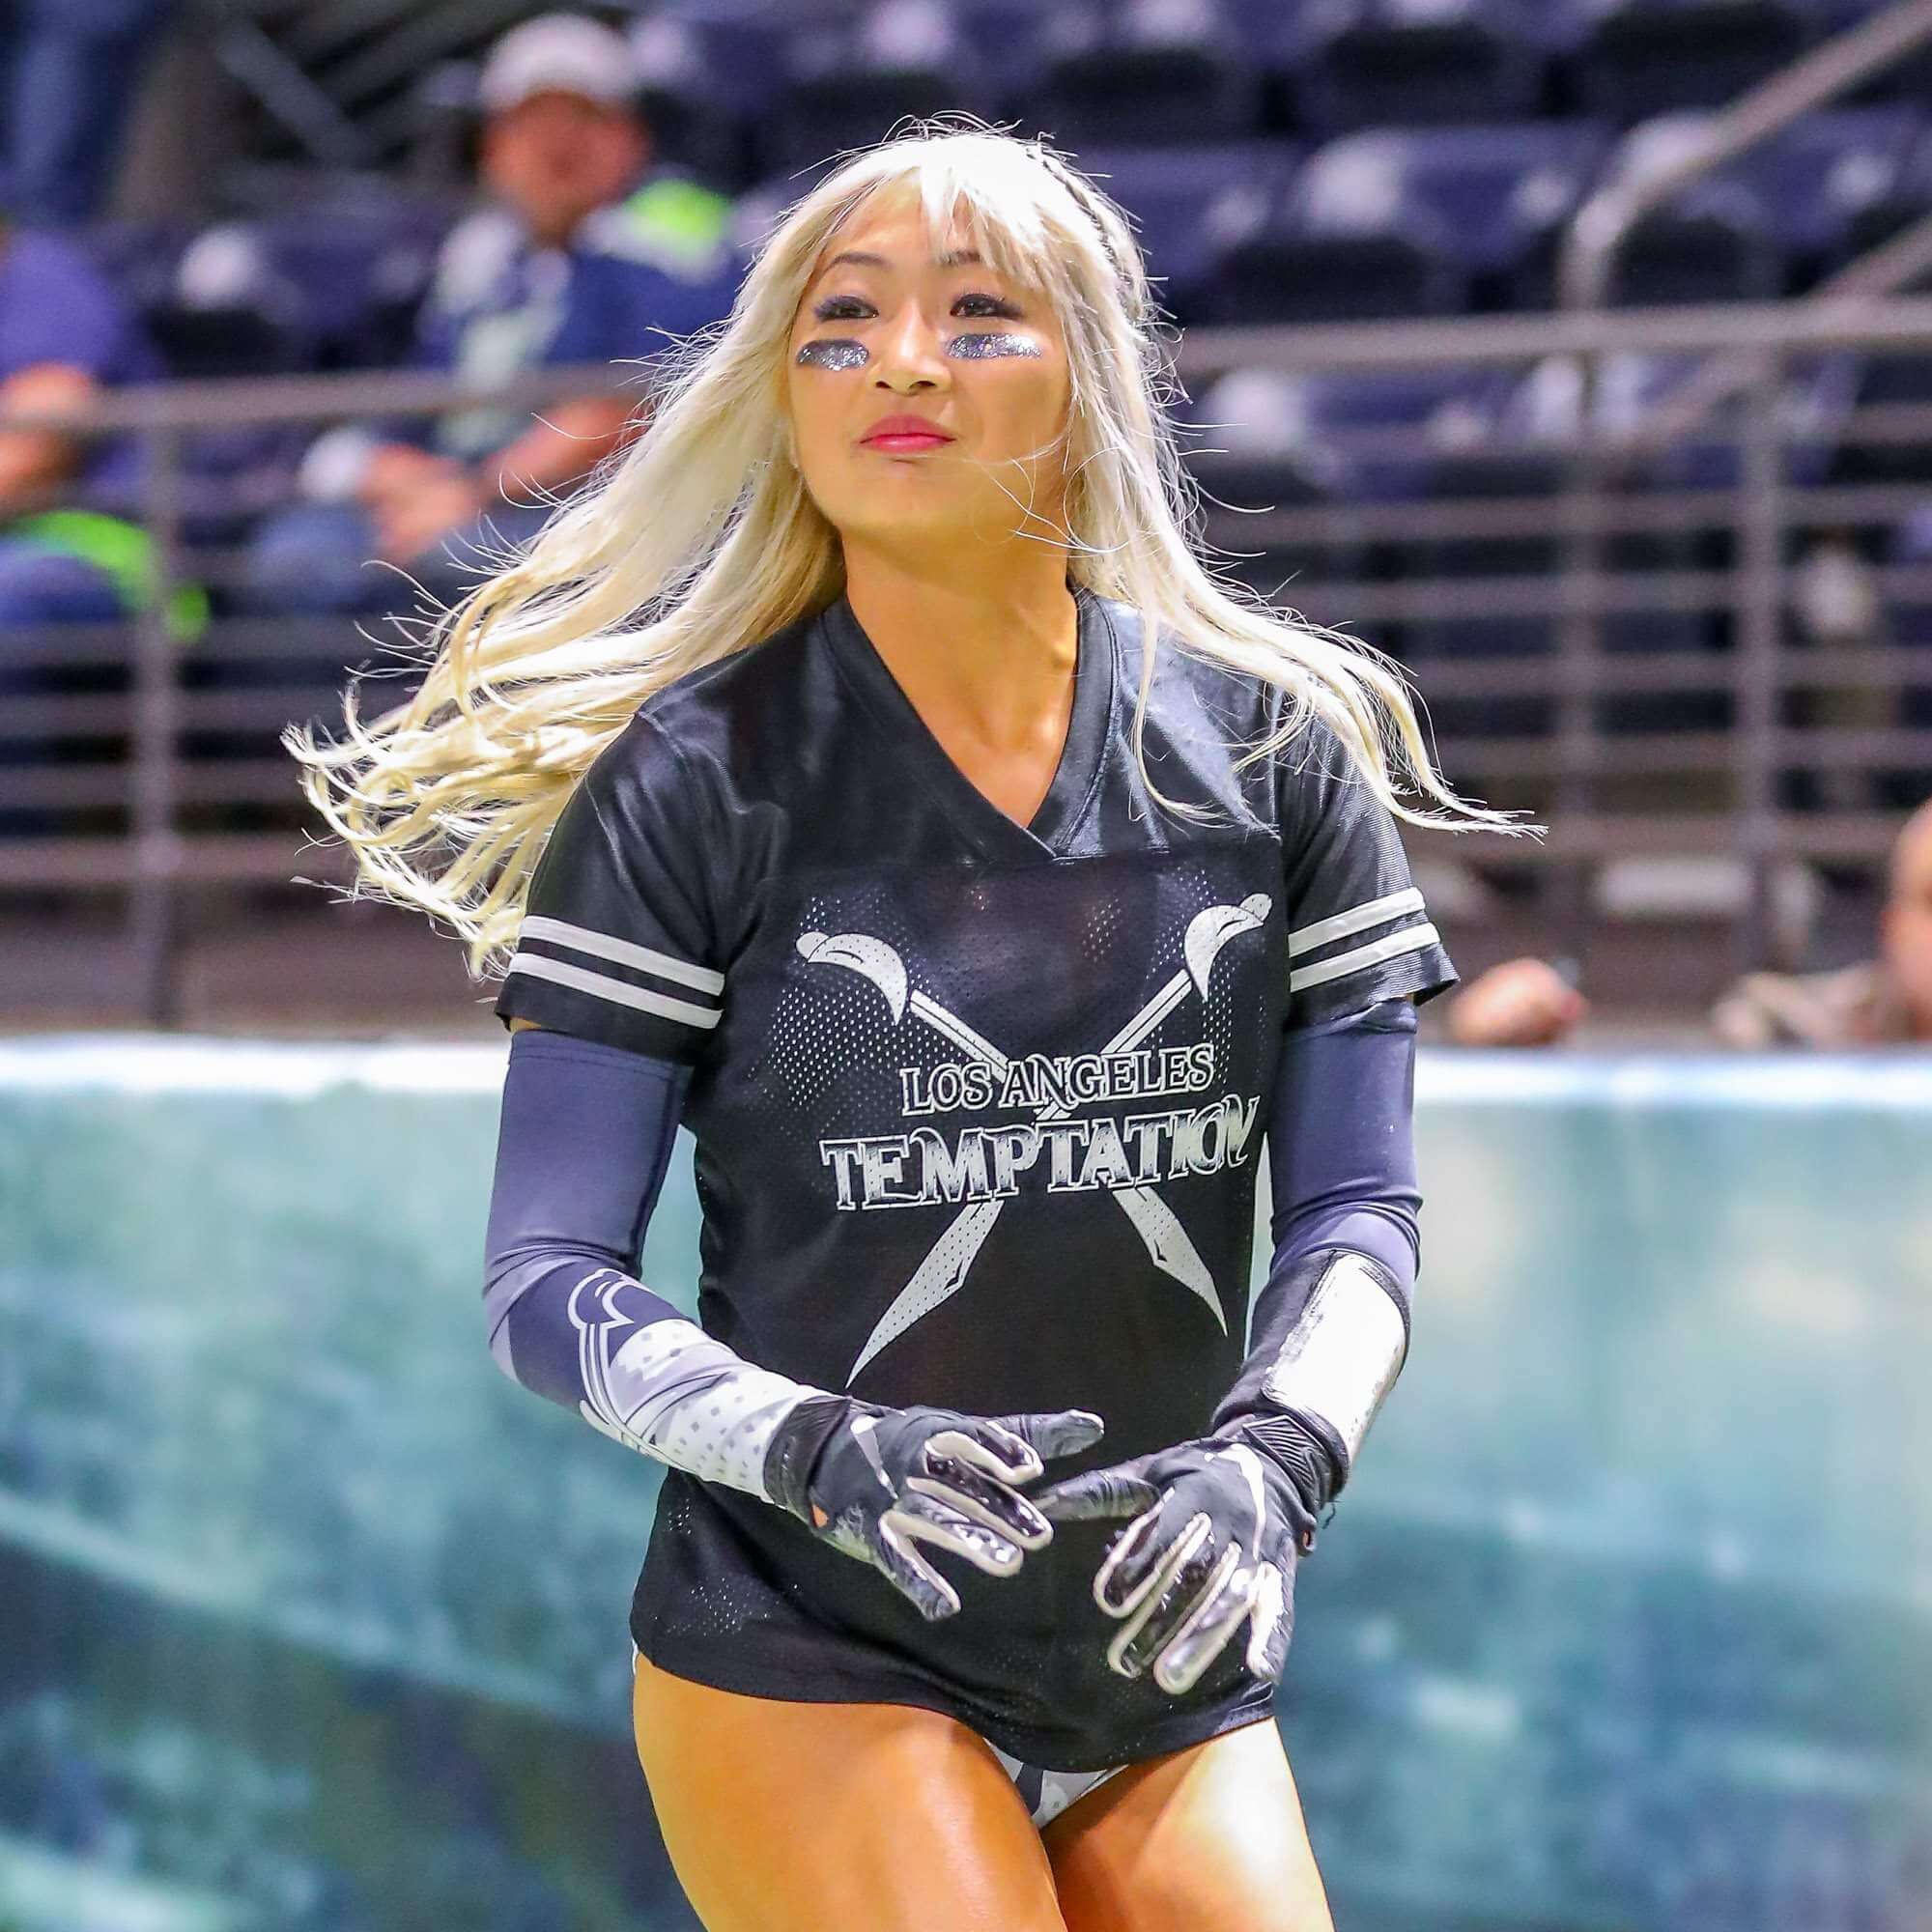 The Legends Football League Beautiful Women And Football, Need We Say Anymore! 99